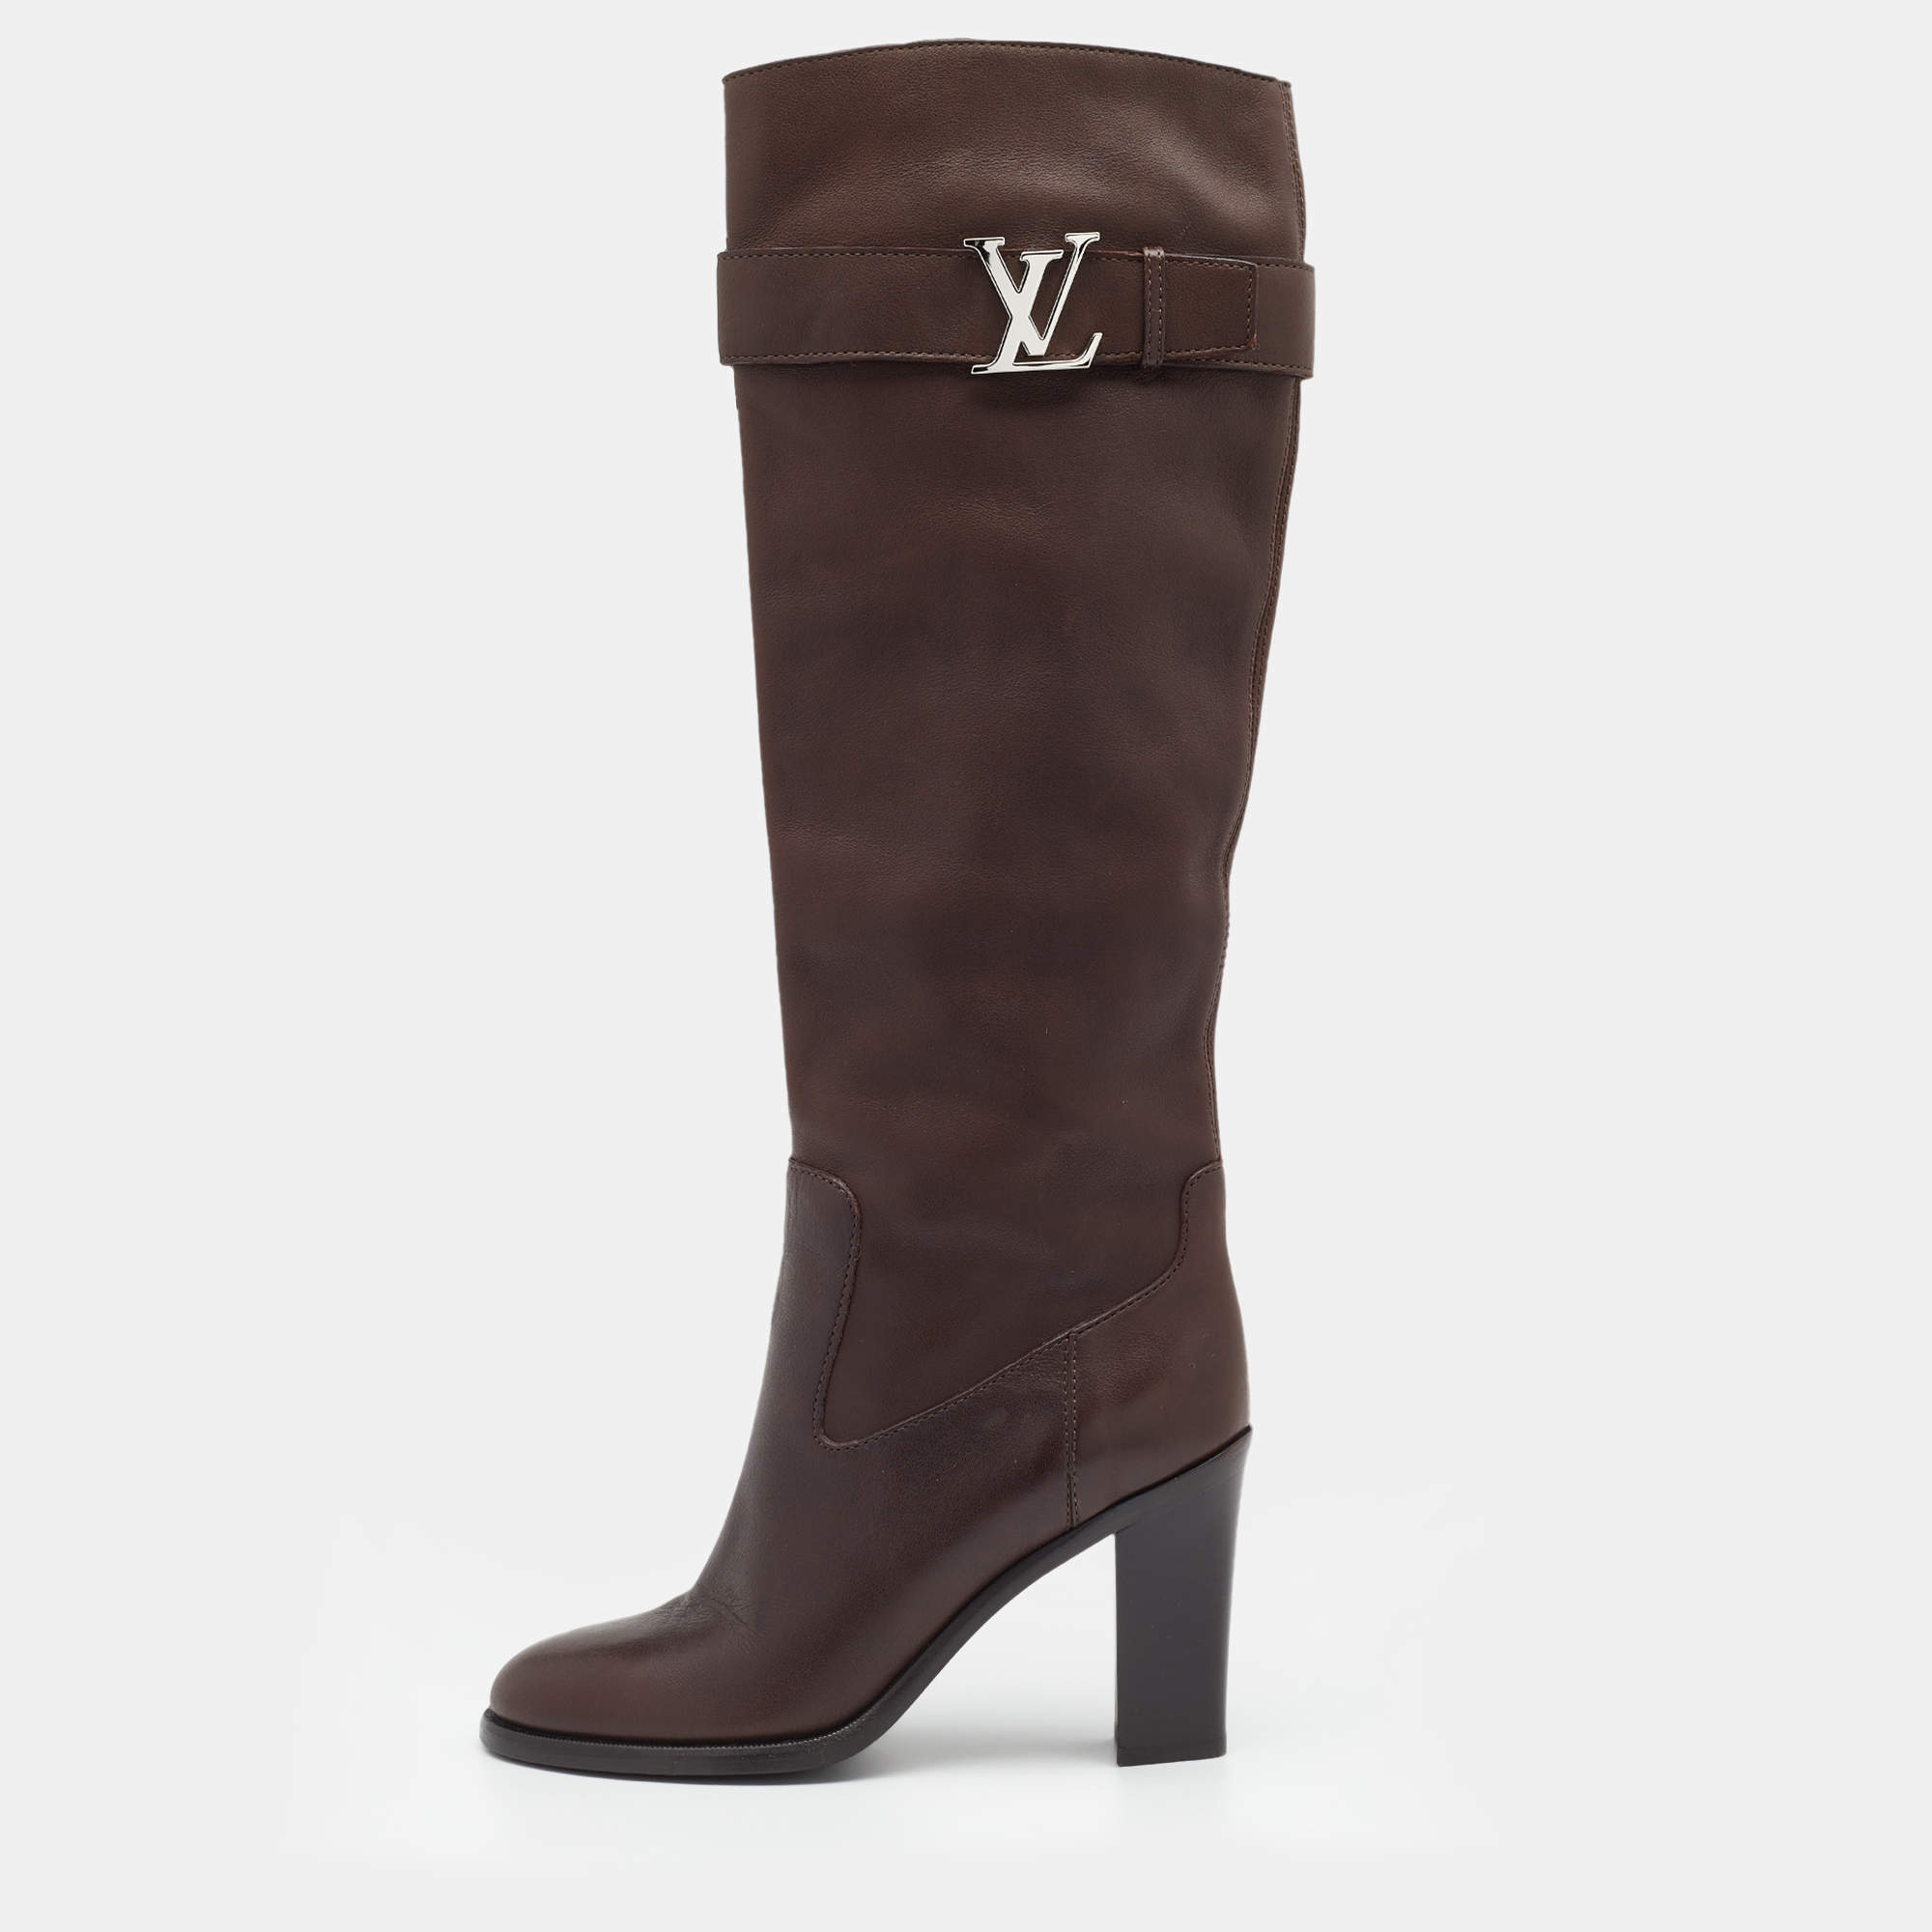 Leather boots Louis Vuitton Brown size 42.5 EU in Leather - 35634576